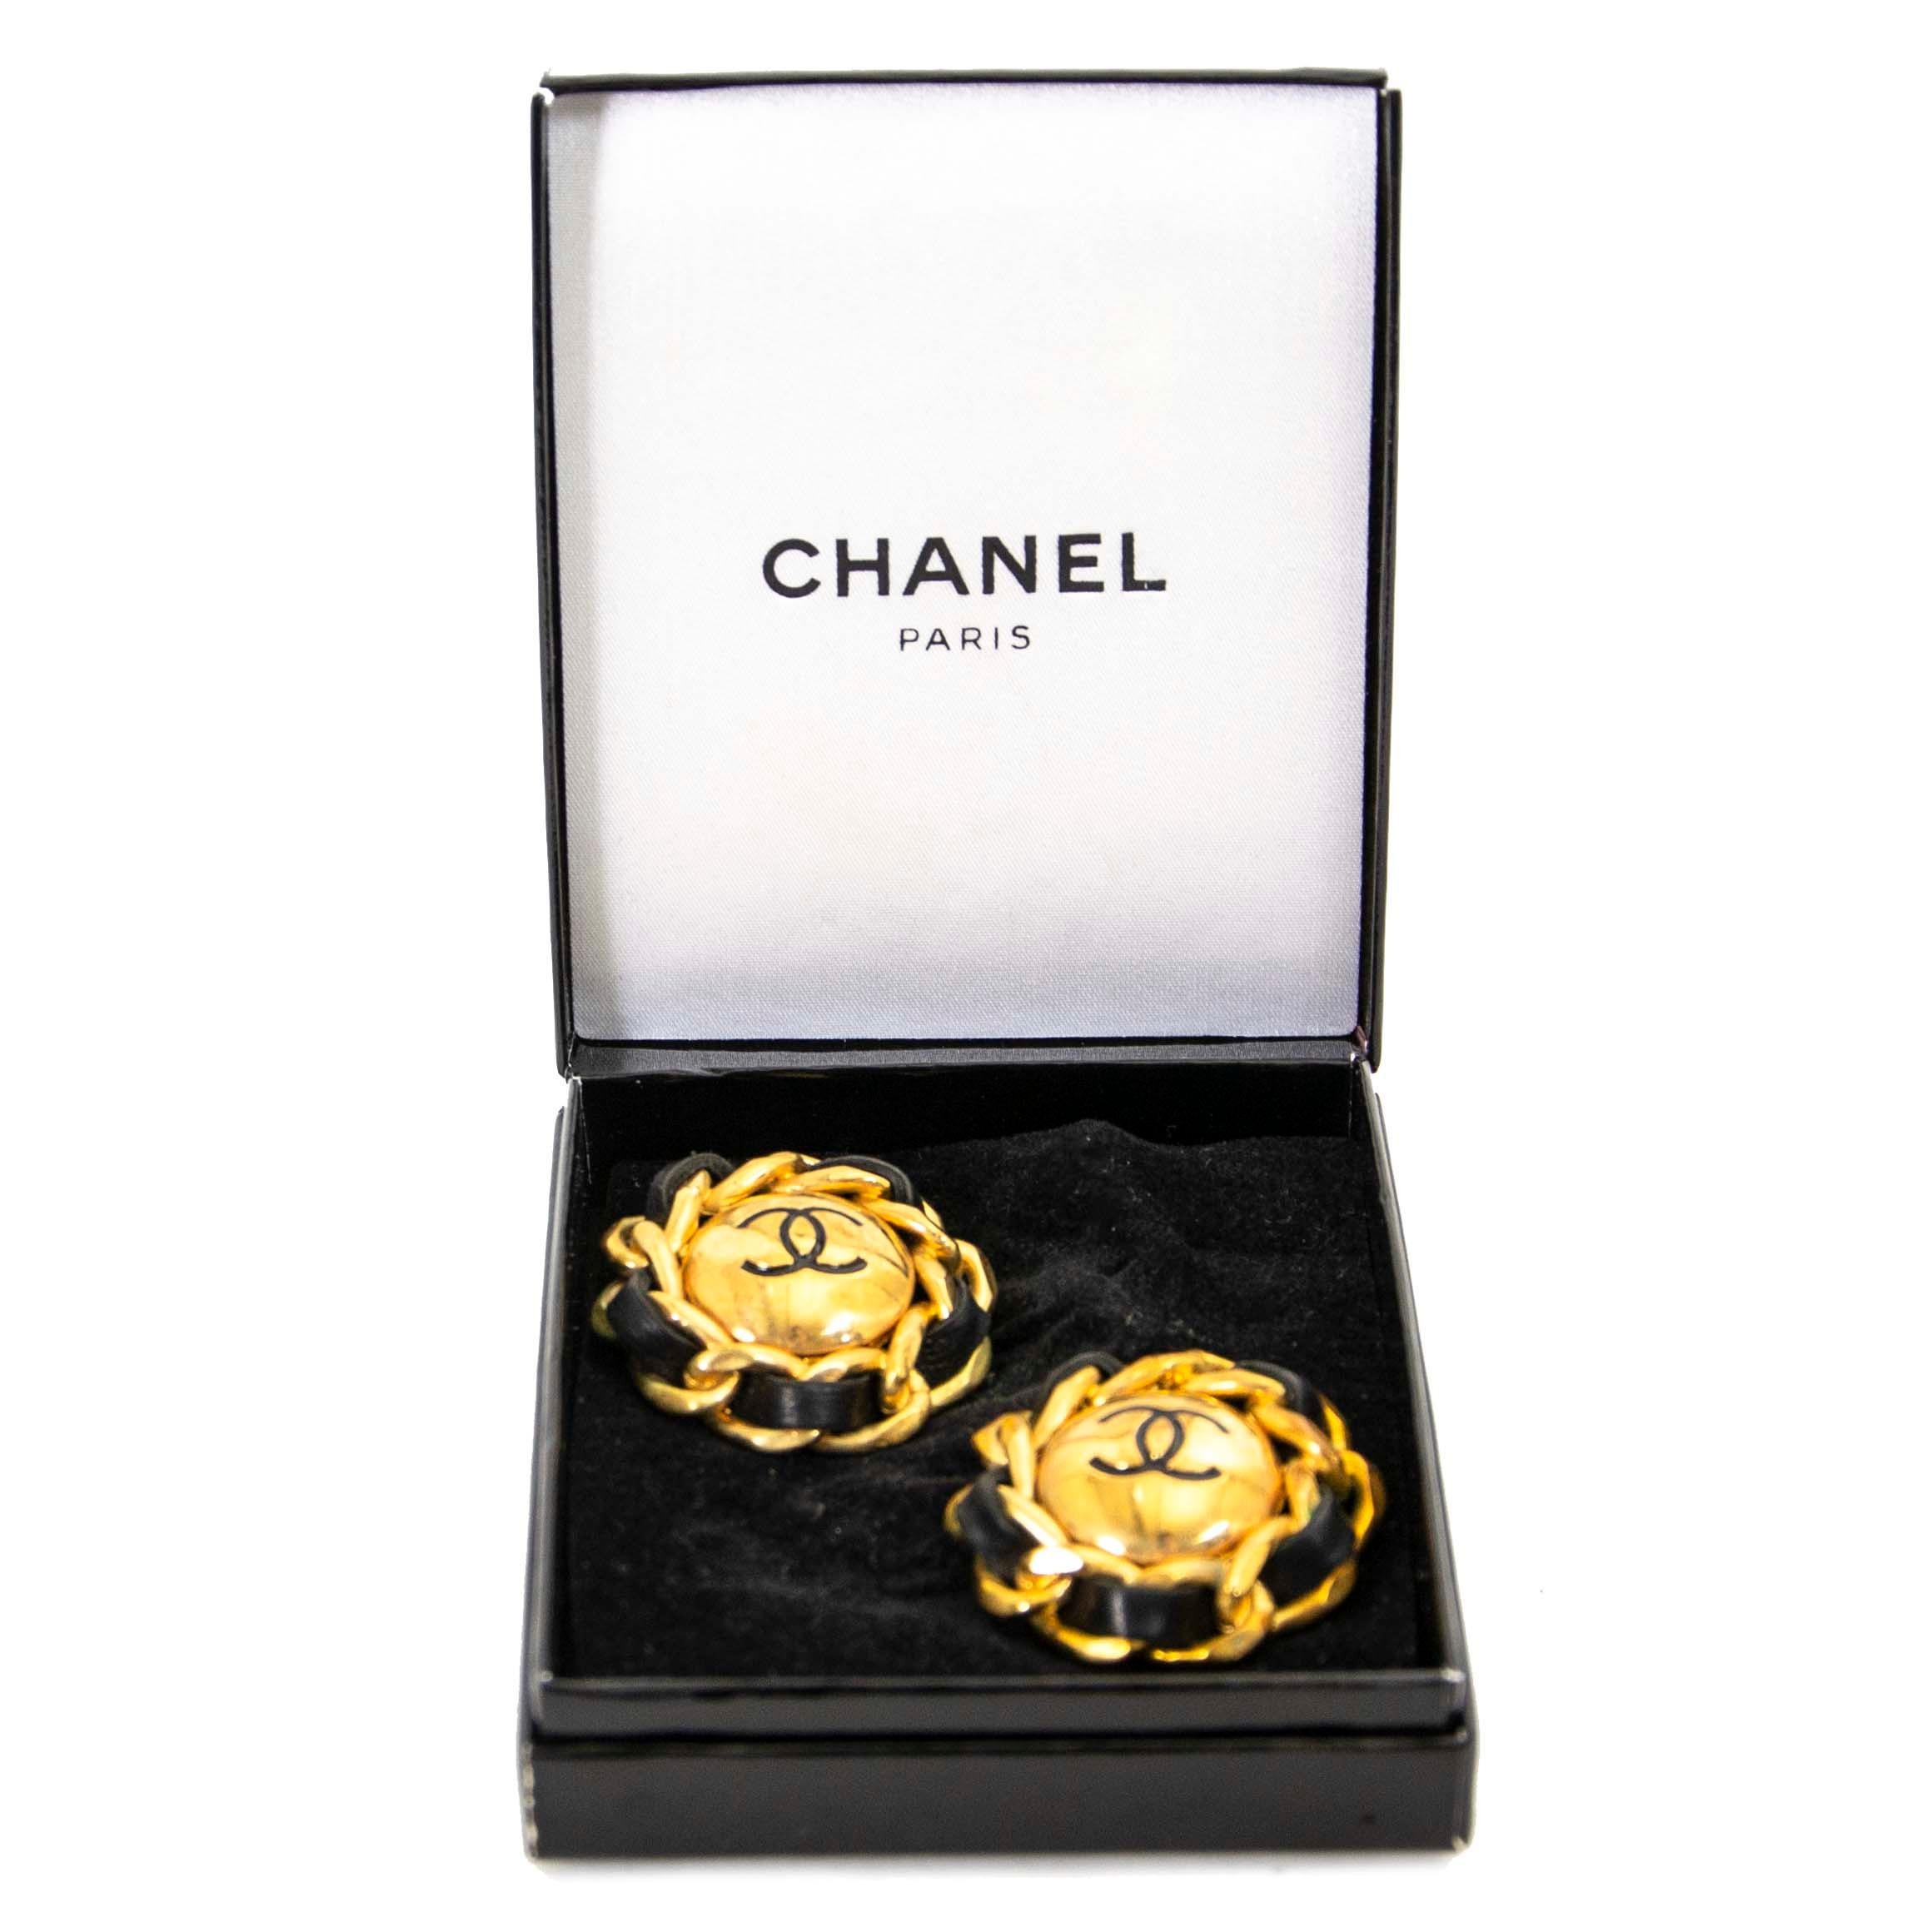 Good condition


Chanel gold and black logo clip on earrings


One of the most signature things of the Chanel brand is their woven chain. These golden Chanel earrings embody everything the brand is about: class, elegance and power. Wearing these